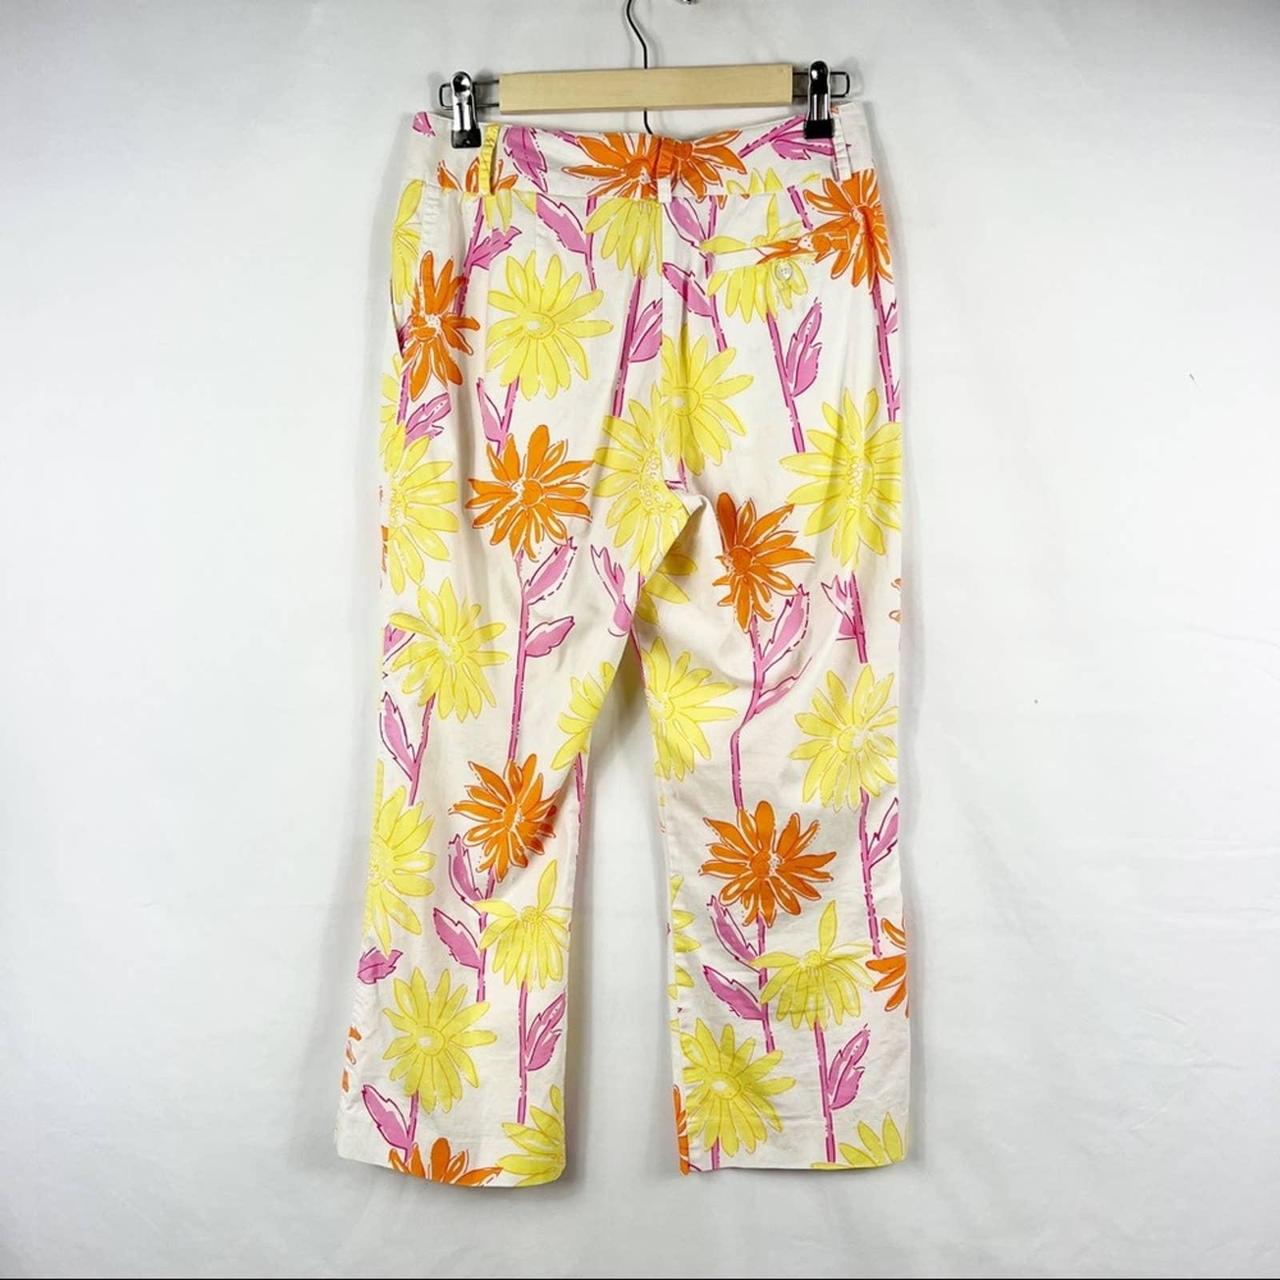 Lilly Pulitzer Women's Orange and Pink Trousers (4)